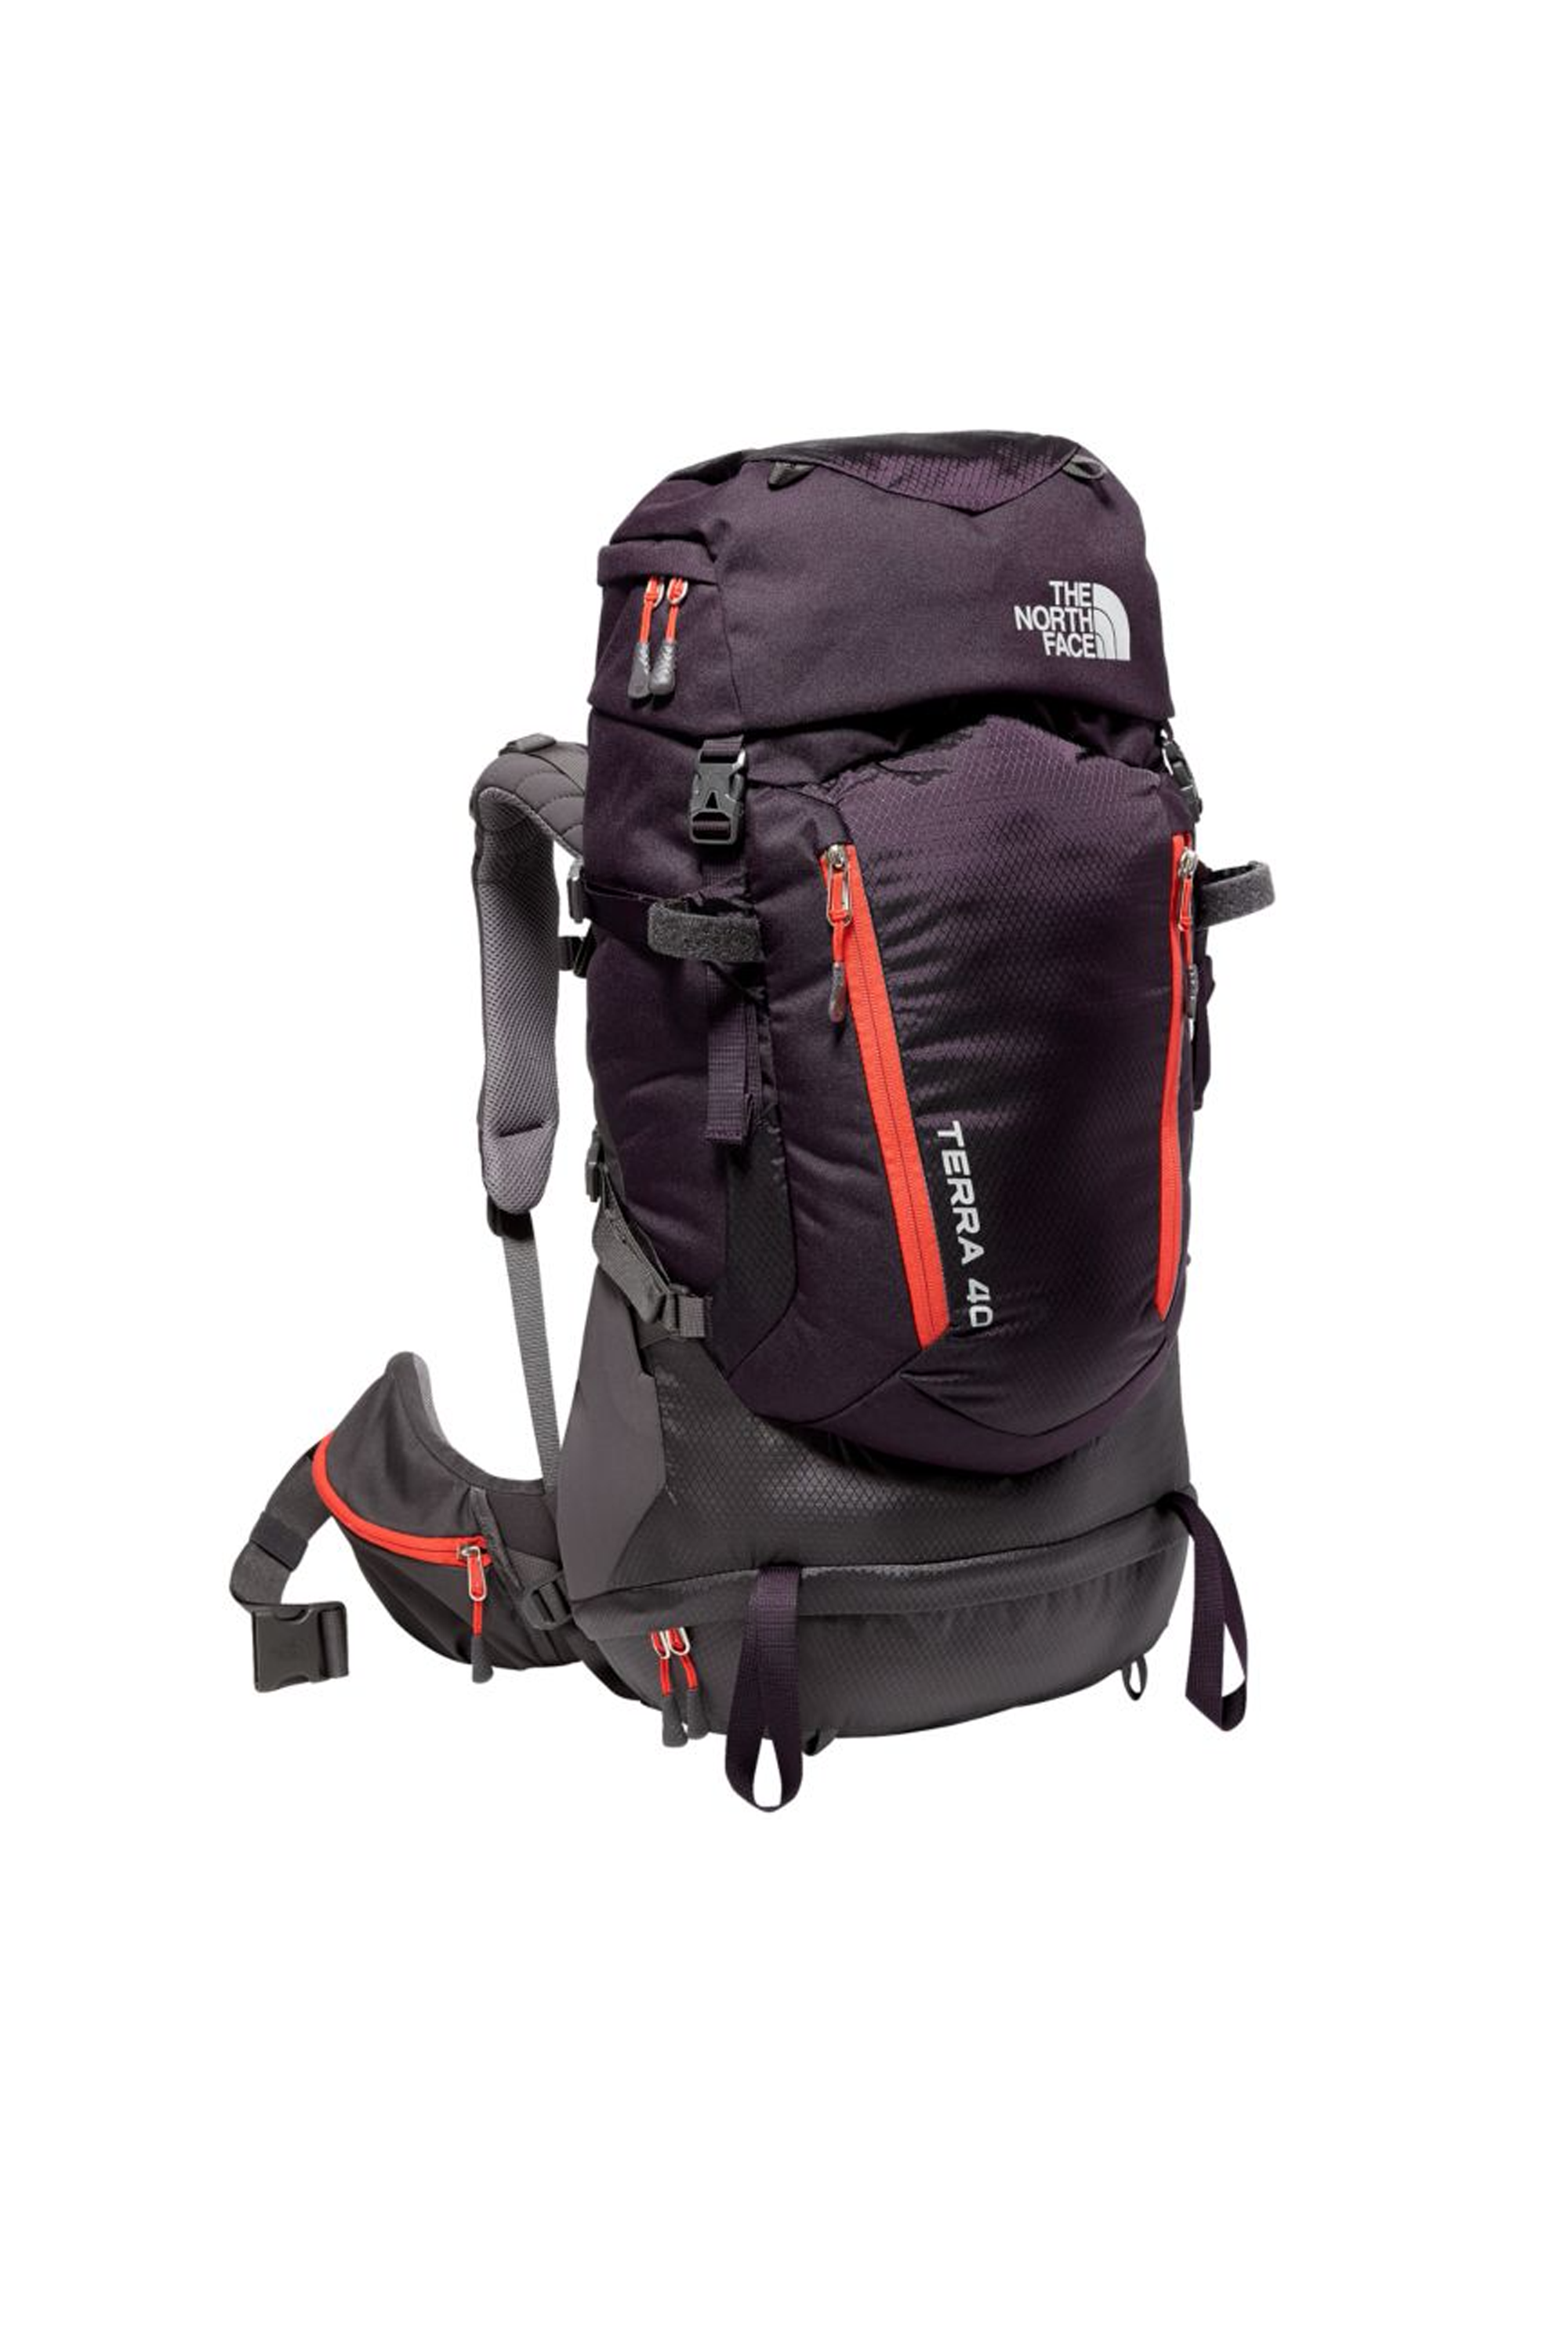 The Best Hiking Backpacks - Top Rated 